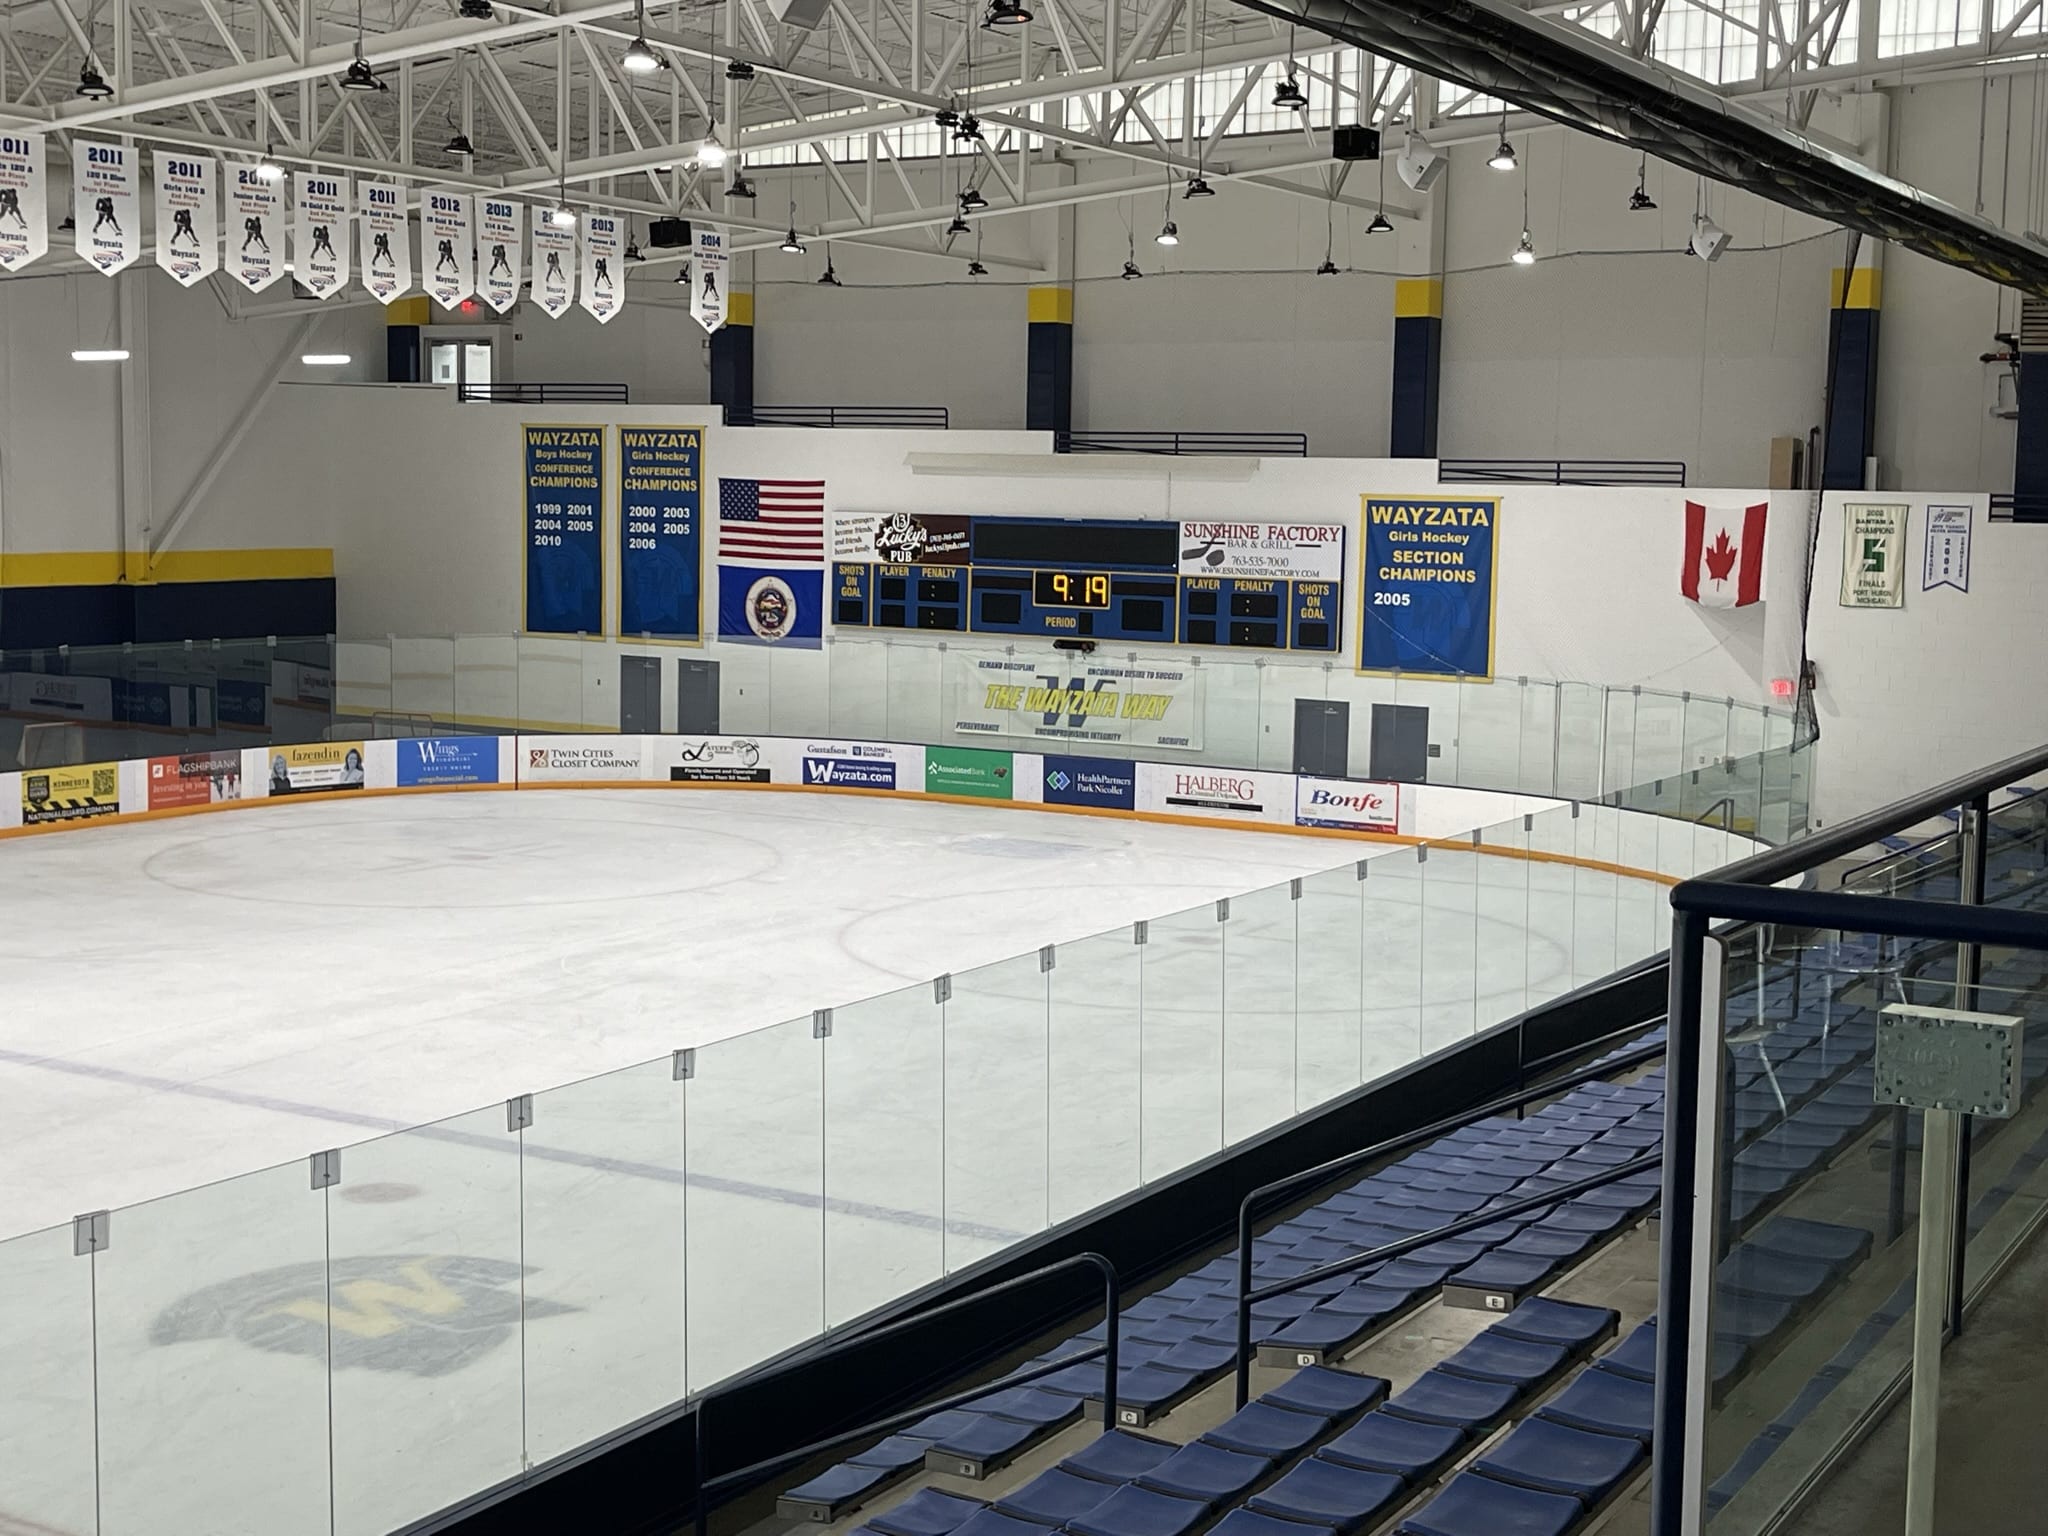 Secure Naming Rights at Minnehaha Ice Arena in Wayzata